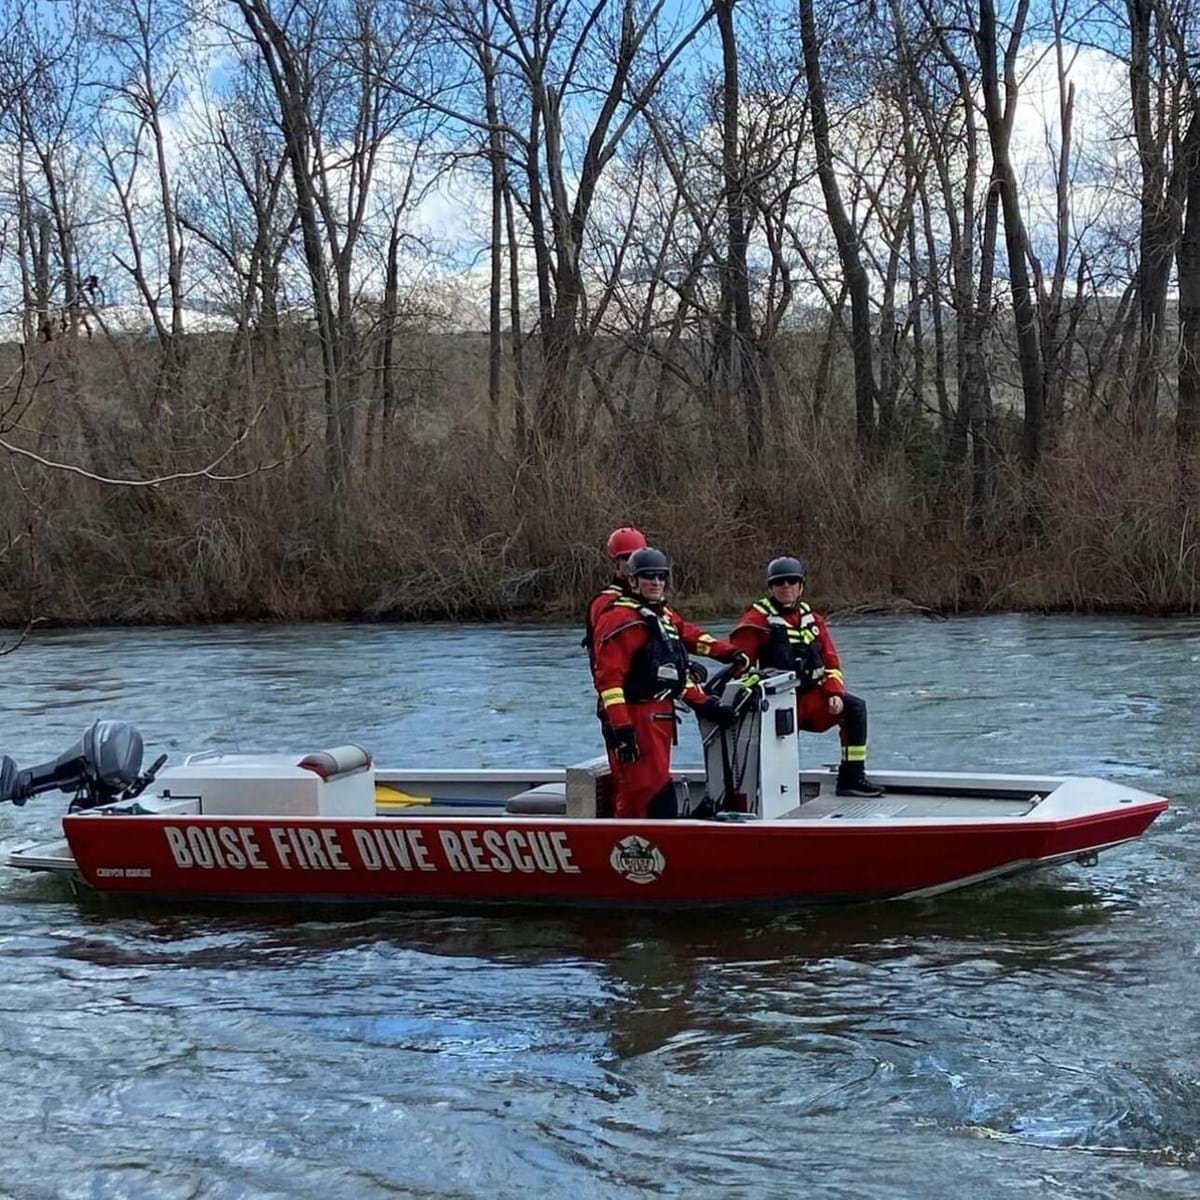 Firefighters at standing on a boat on the Boise River.